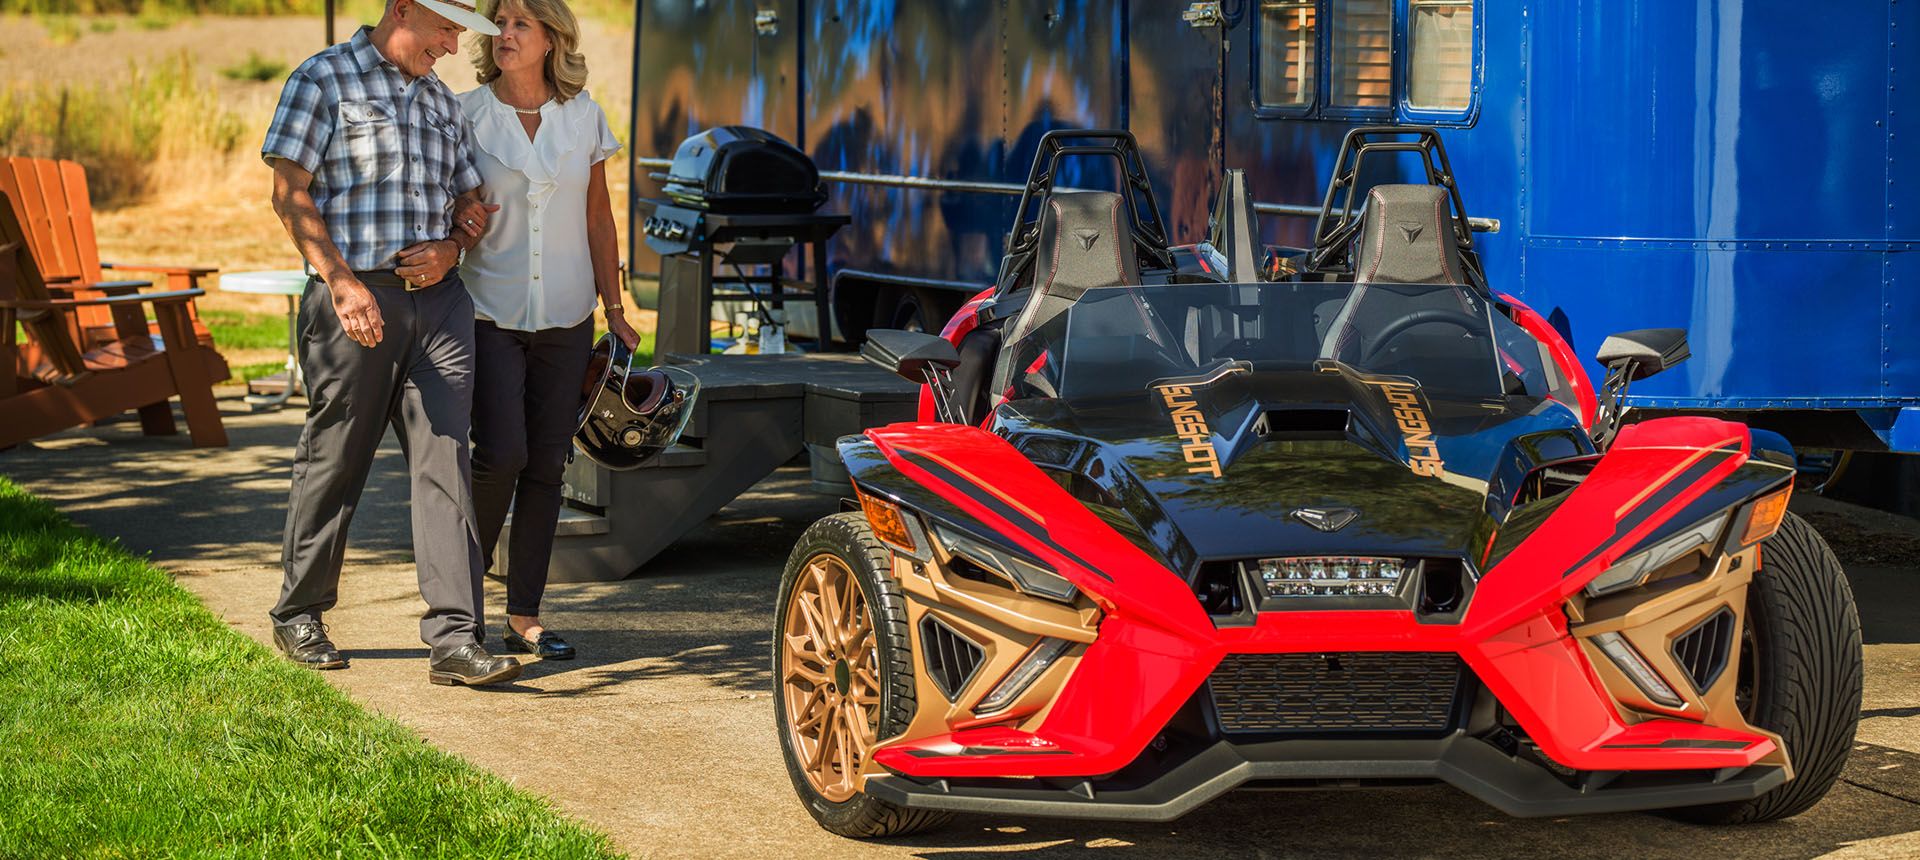 2022 Slingshot Signature Limited Edition AutoDrive in Mahwah, New Jersey - Photo 10